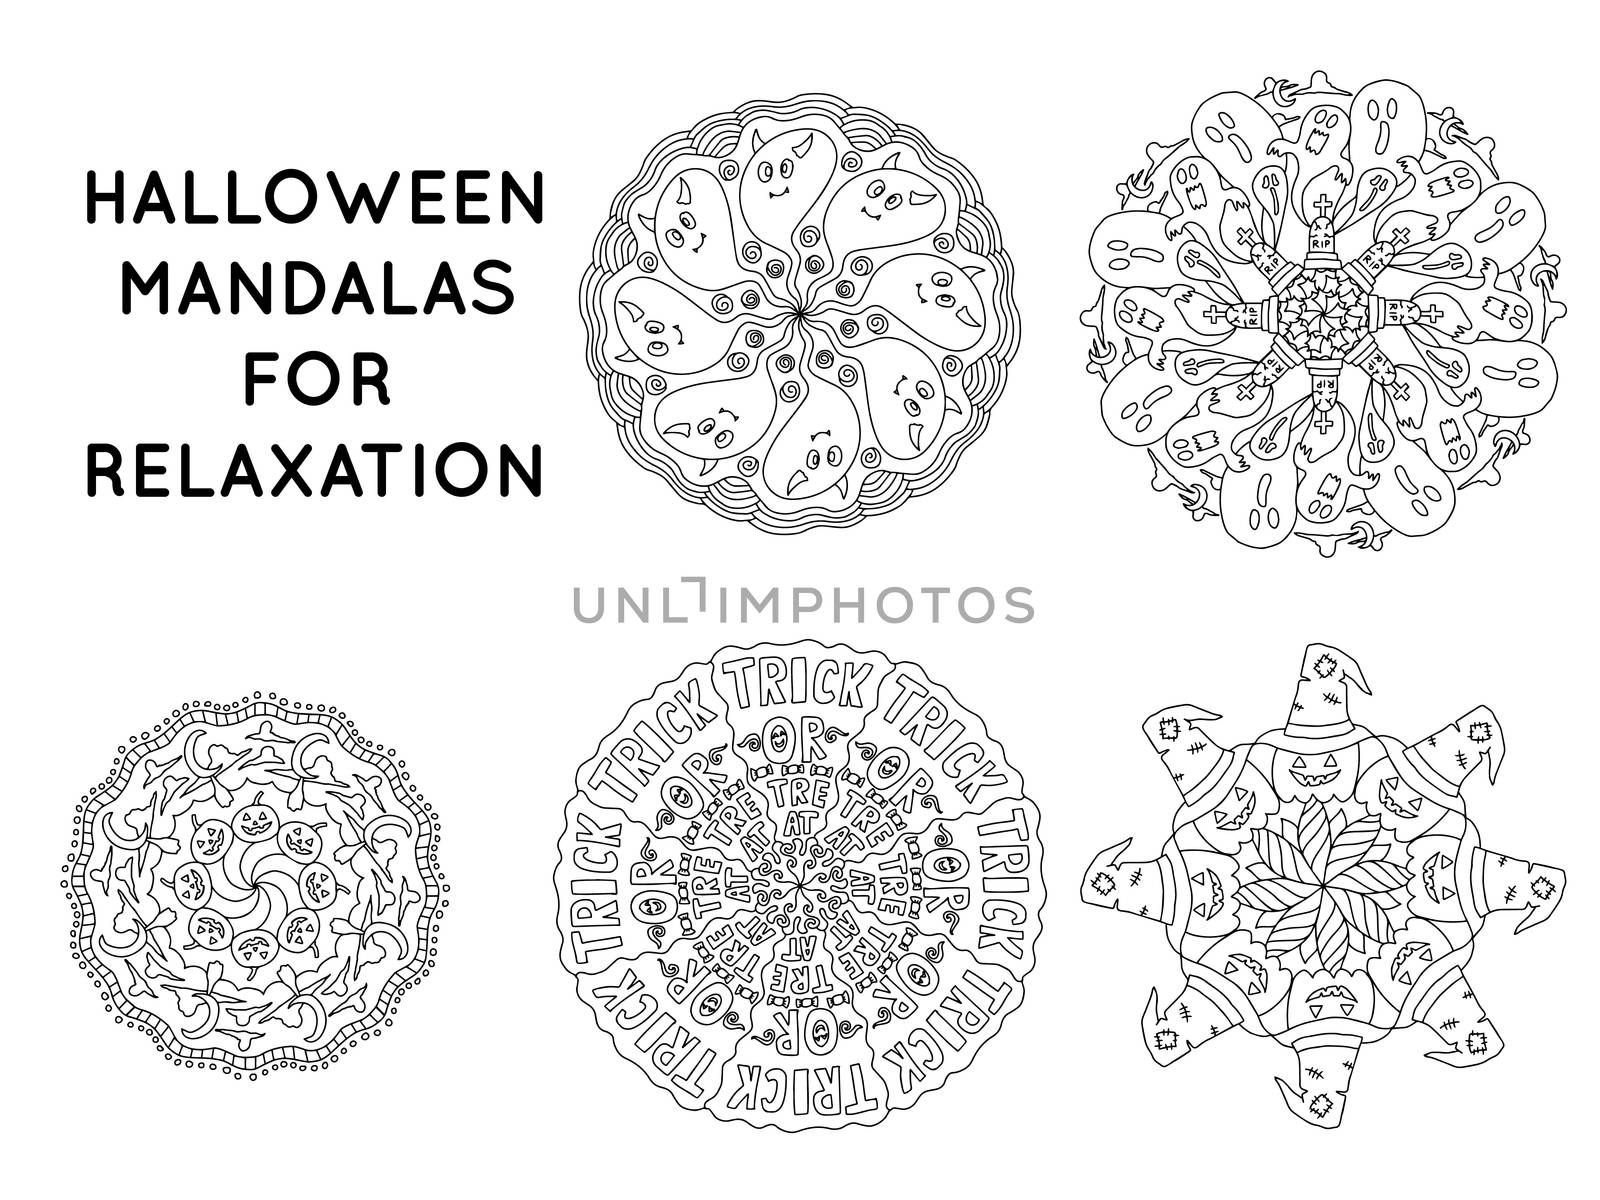 Halloween mandala outline patterns for coloring books